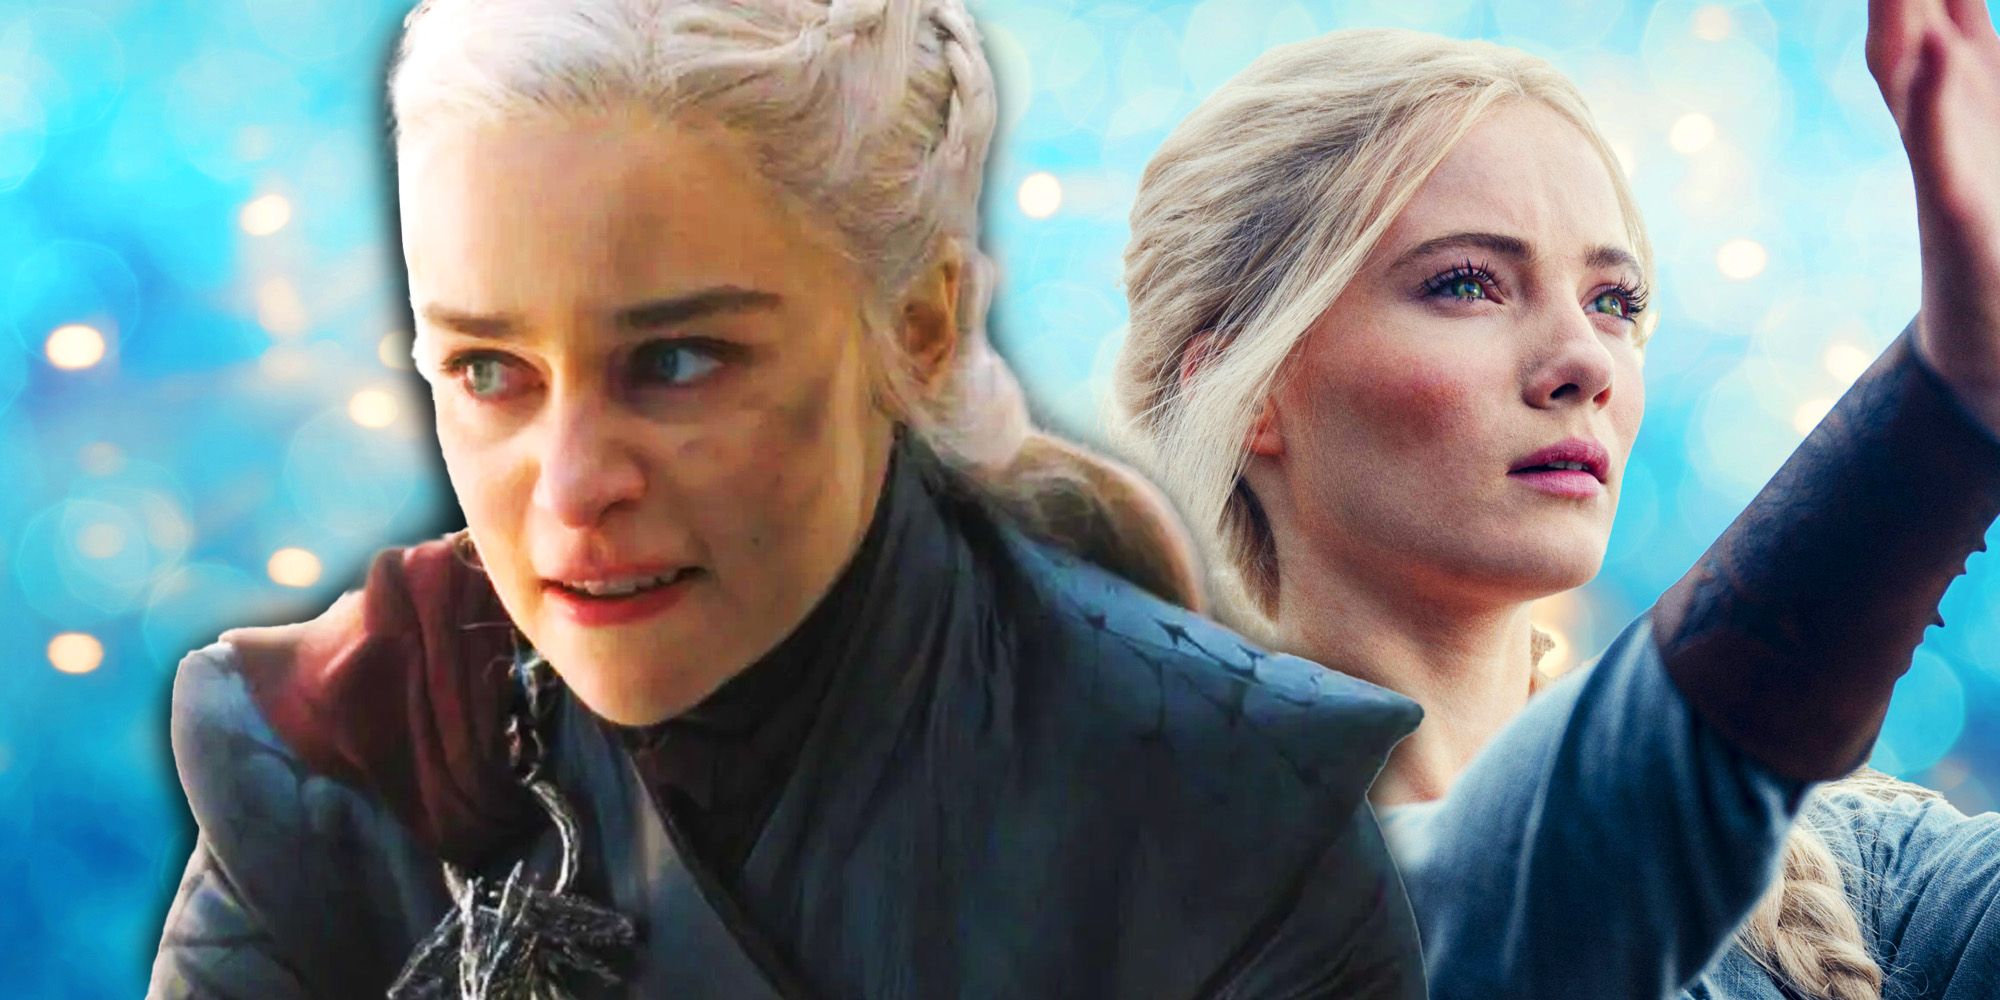 Ciri from The Witcher and Daenerys from Game of Thrones season 8